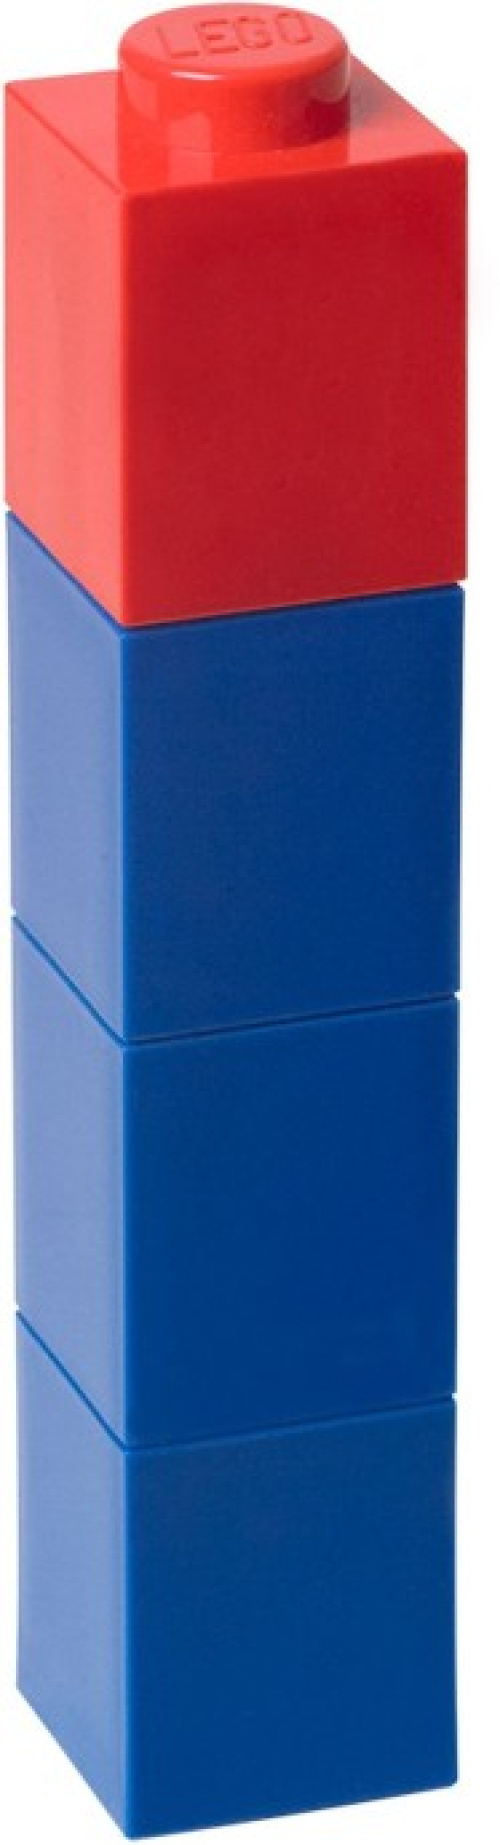 5004896-1 Square Drinking Bottle – Blue with Red Lid